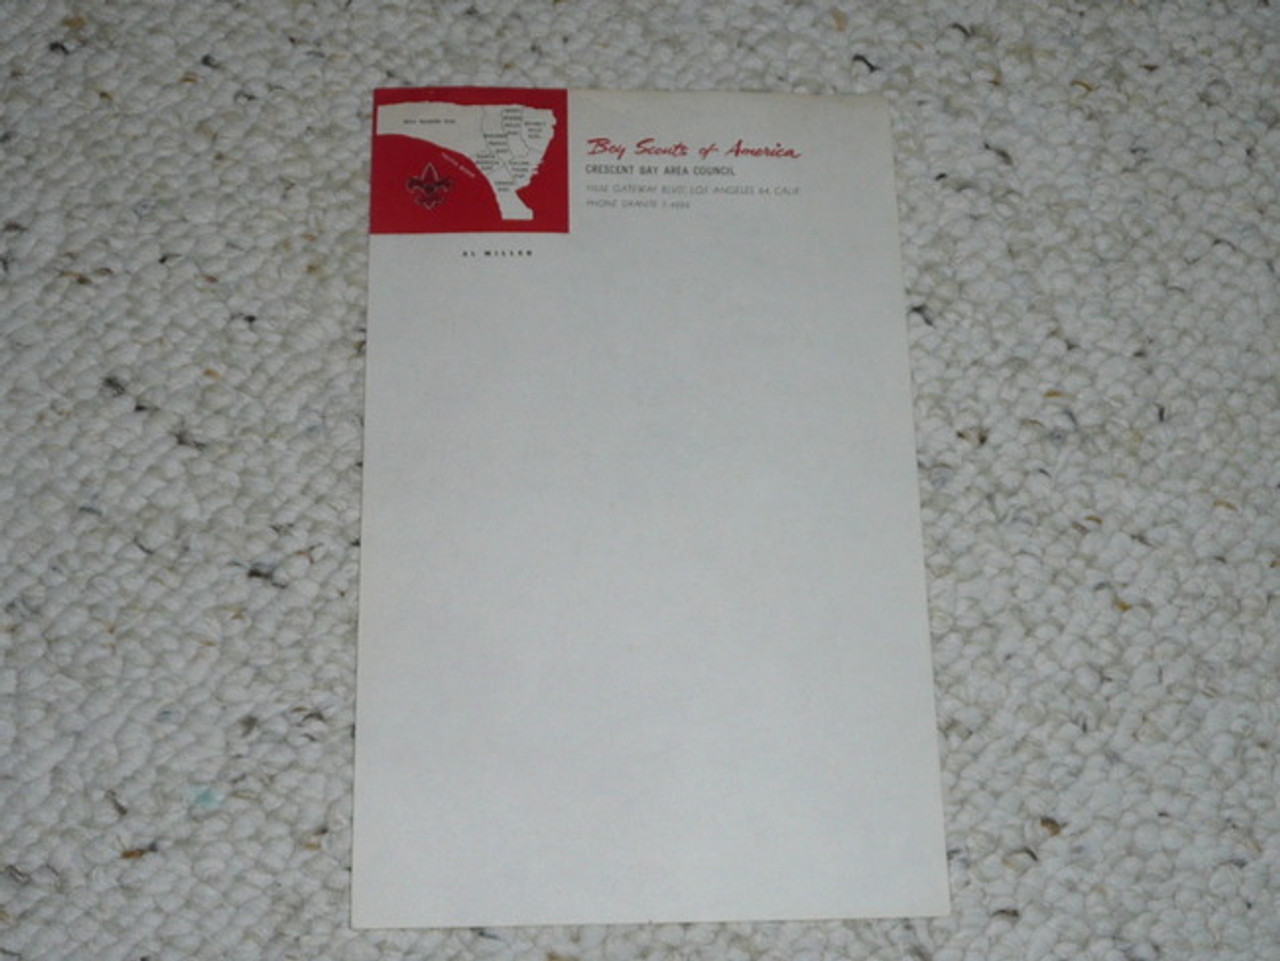 Crescent Bay Area Council, Note Pad Sized piece of Council Stationary, unused